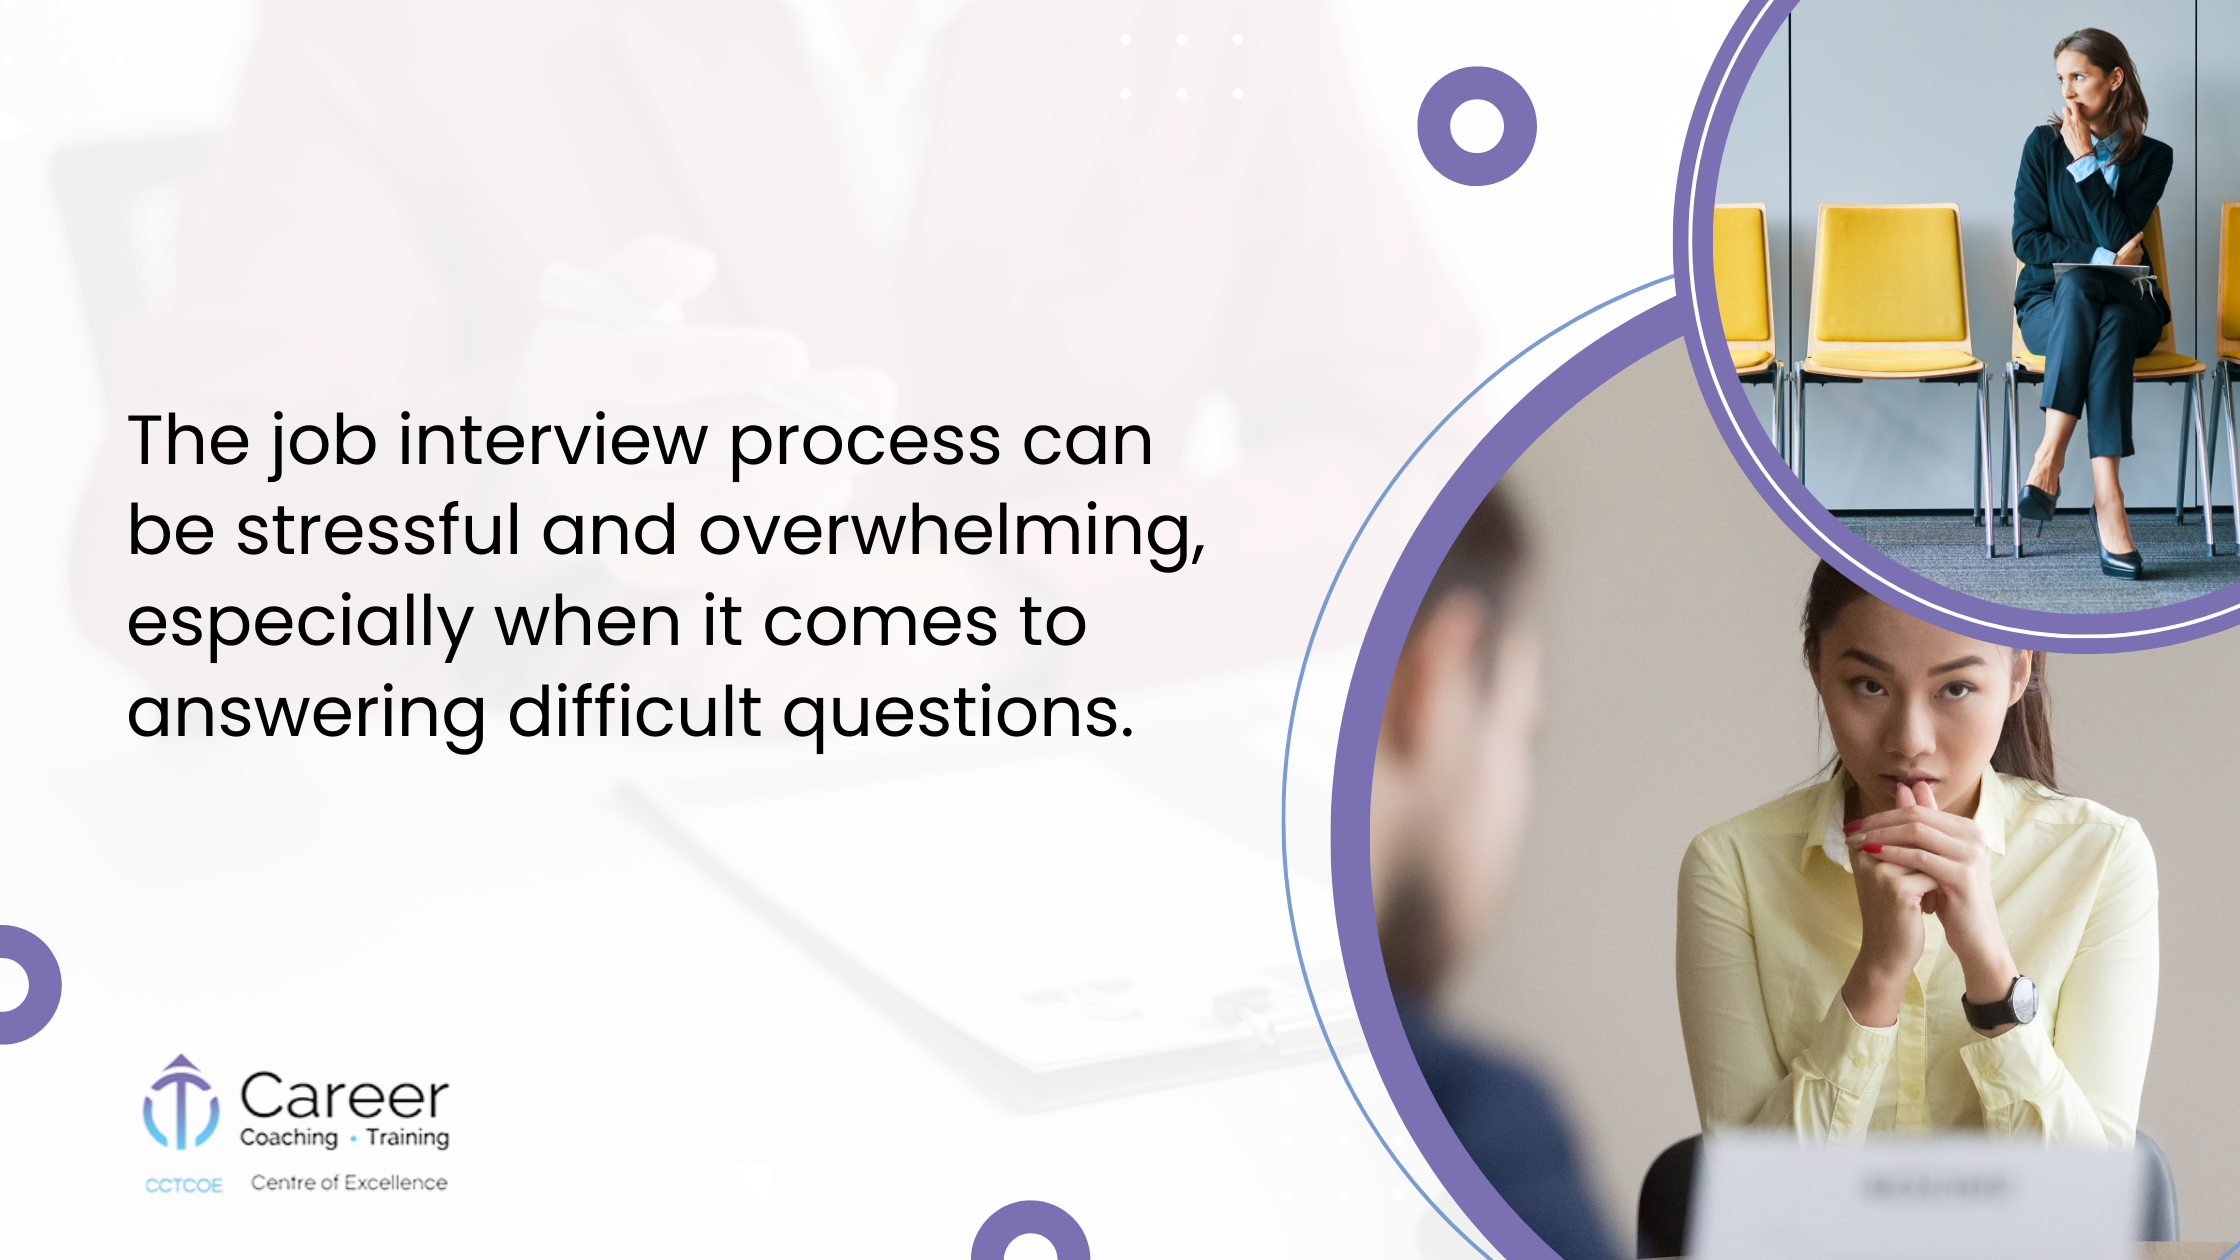 The job interview process can be stressful and overwhelming, especially when it comes to answering difficult questions.